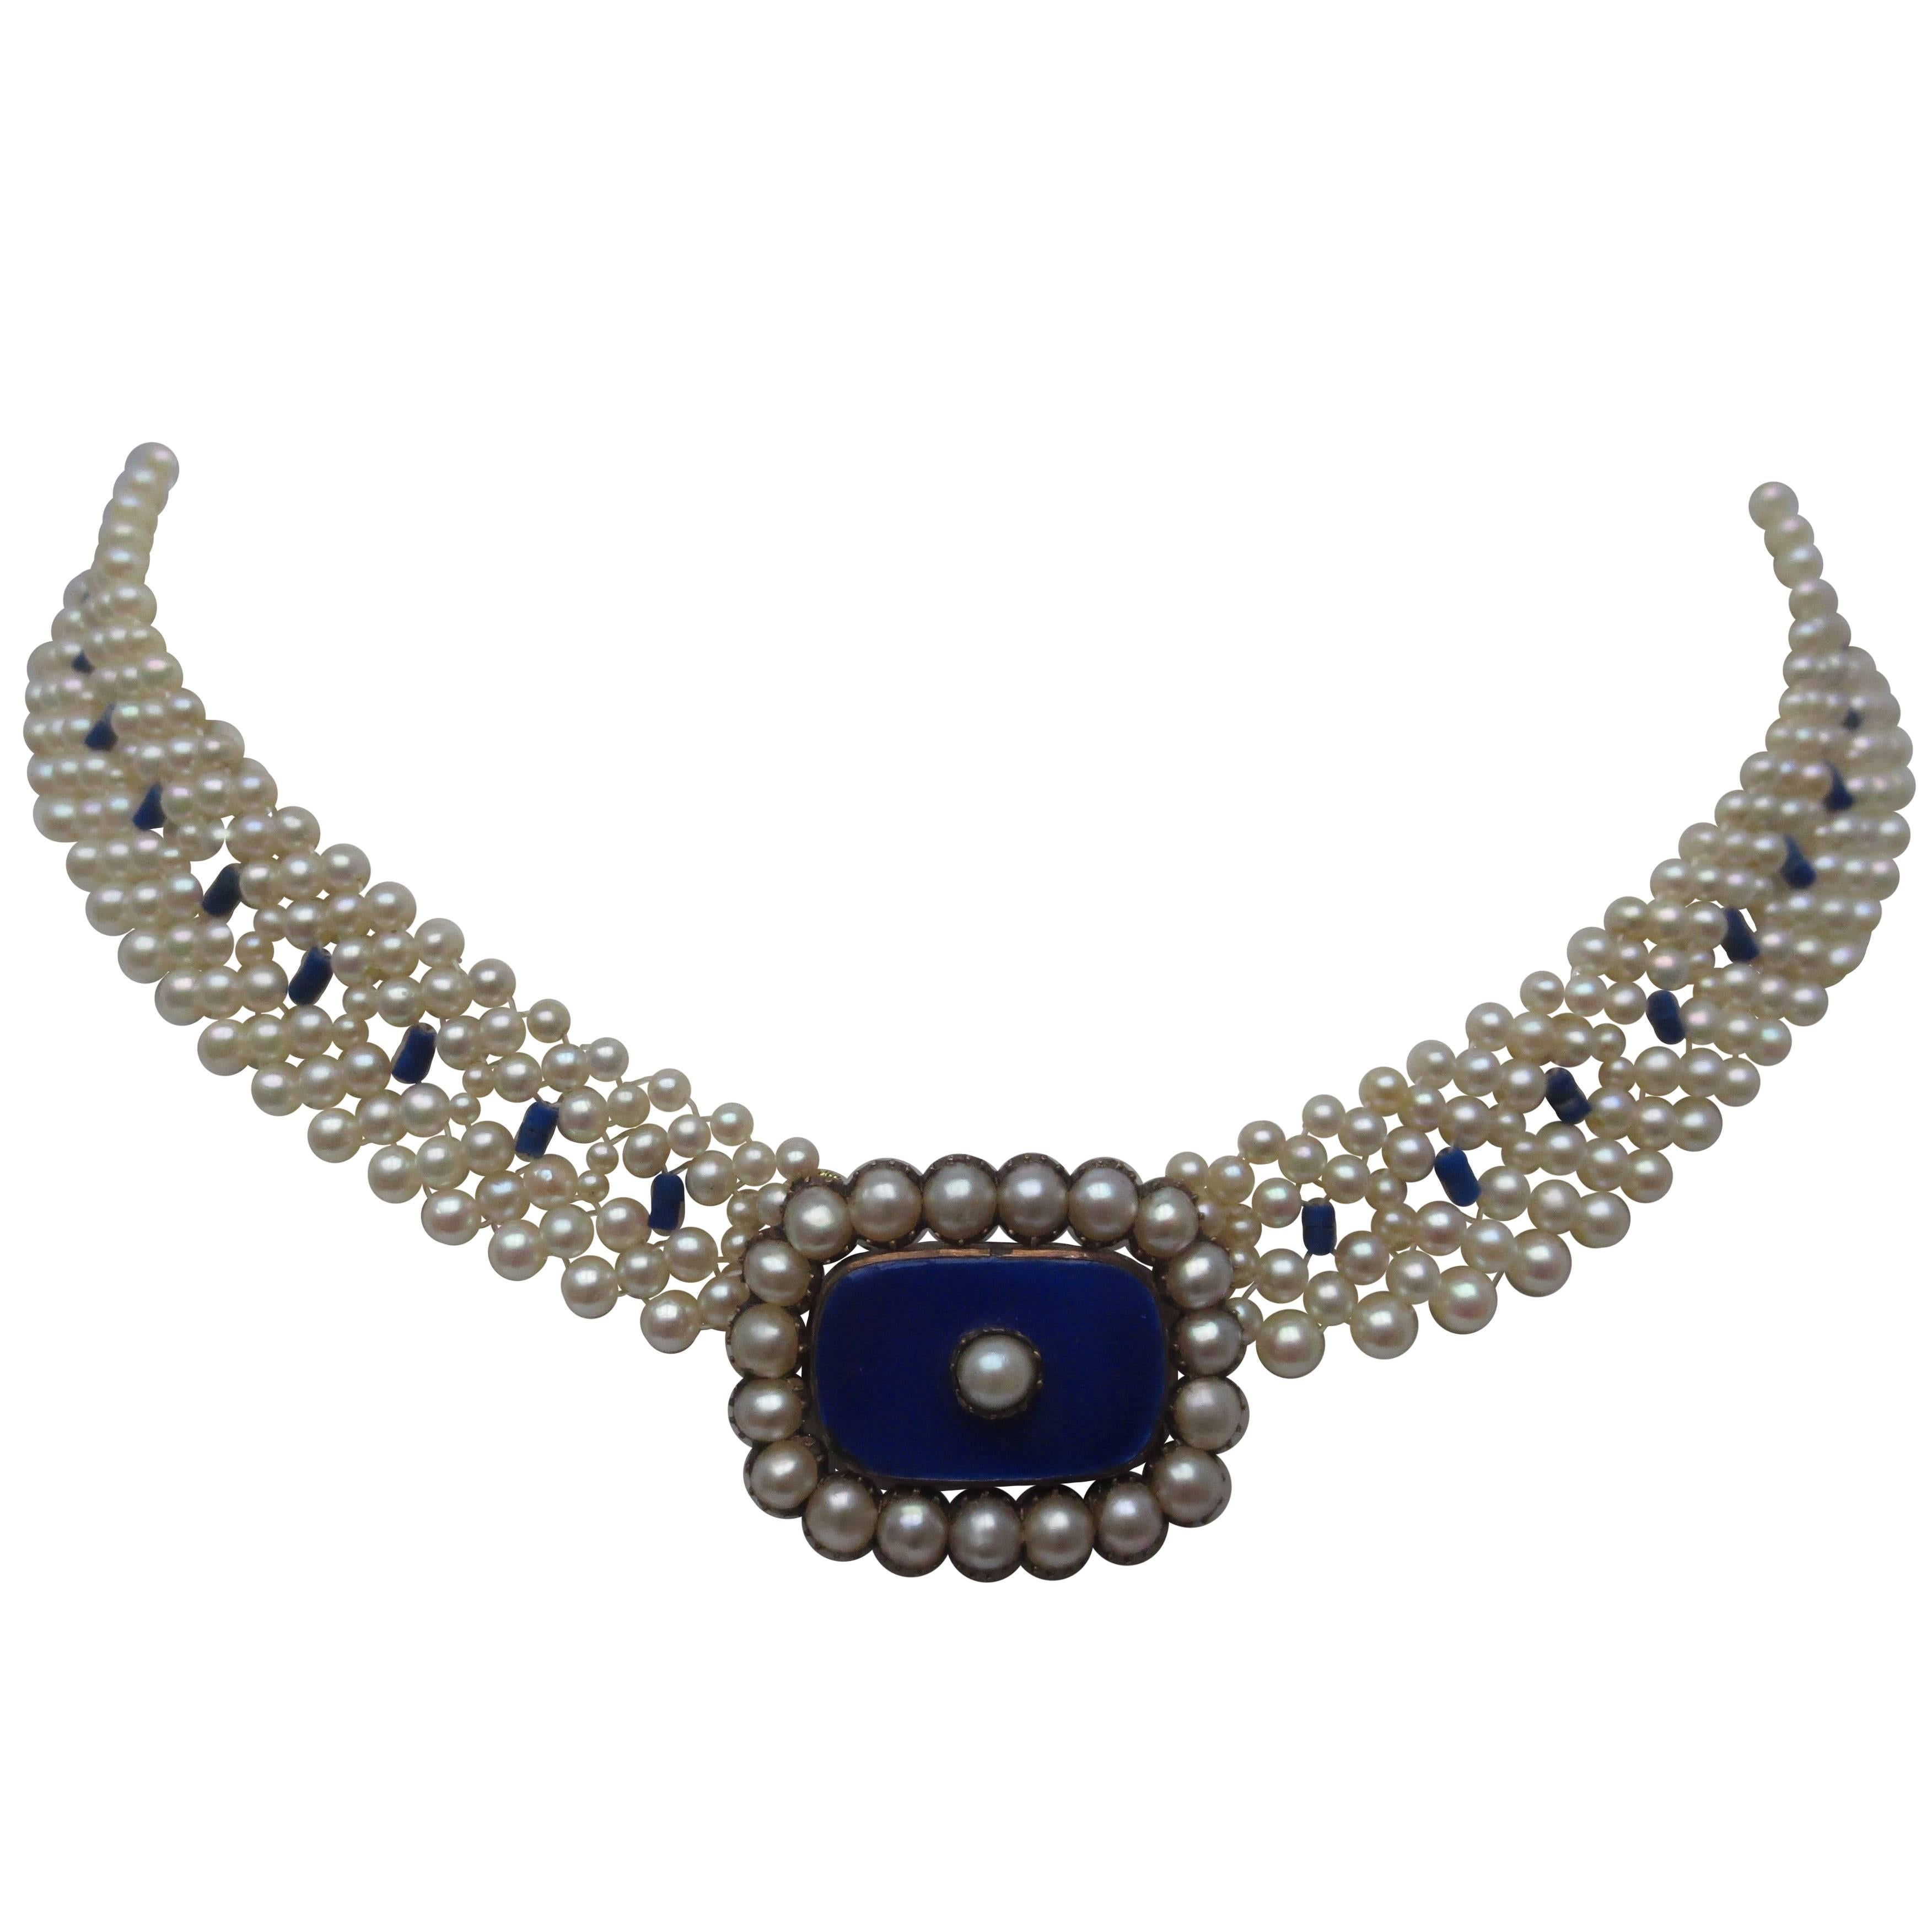 Pearl, Lapis Lazuli, and Bue Enamel Necklace with Pearl and 14k Gold Clasp